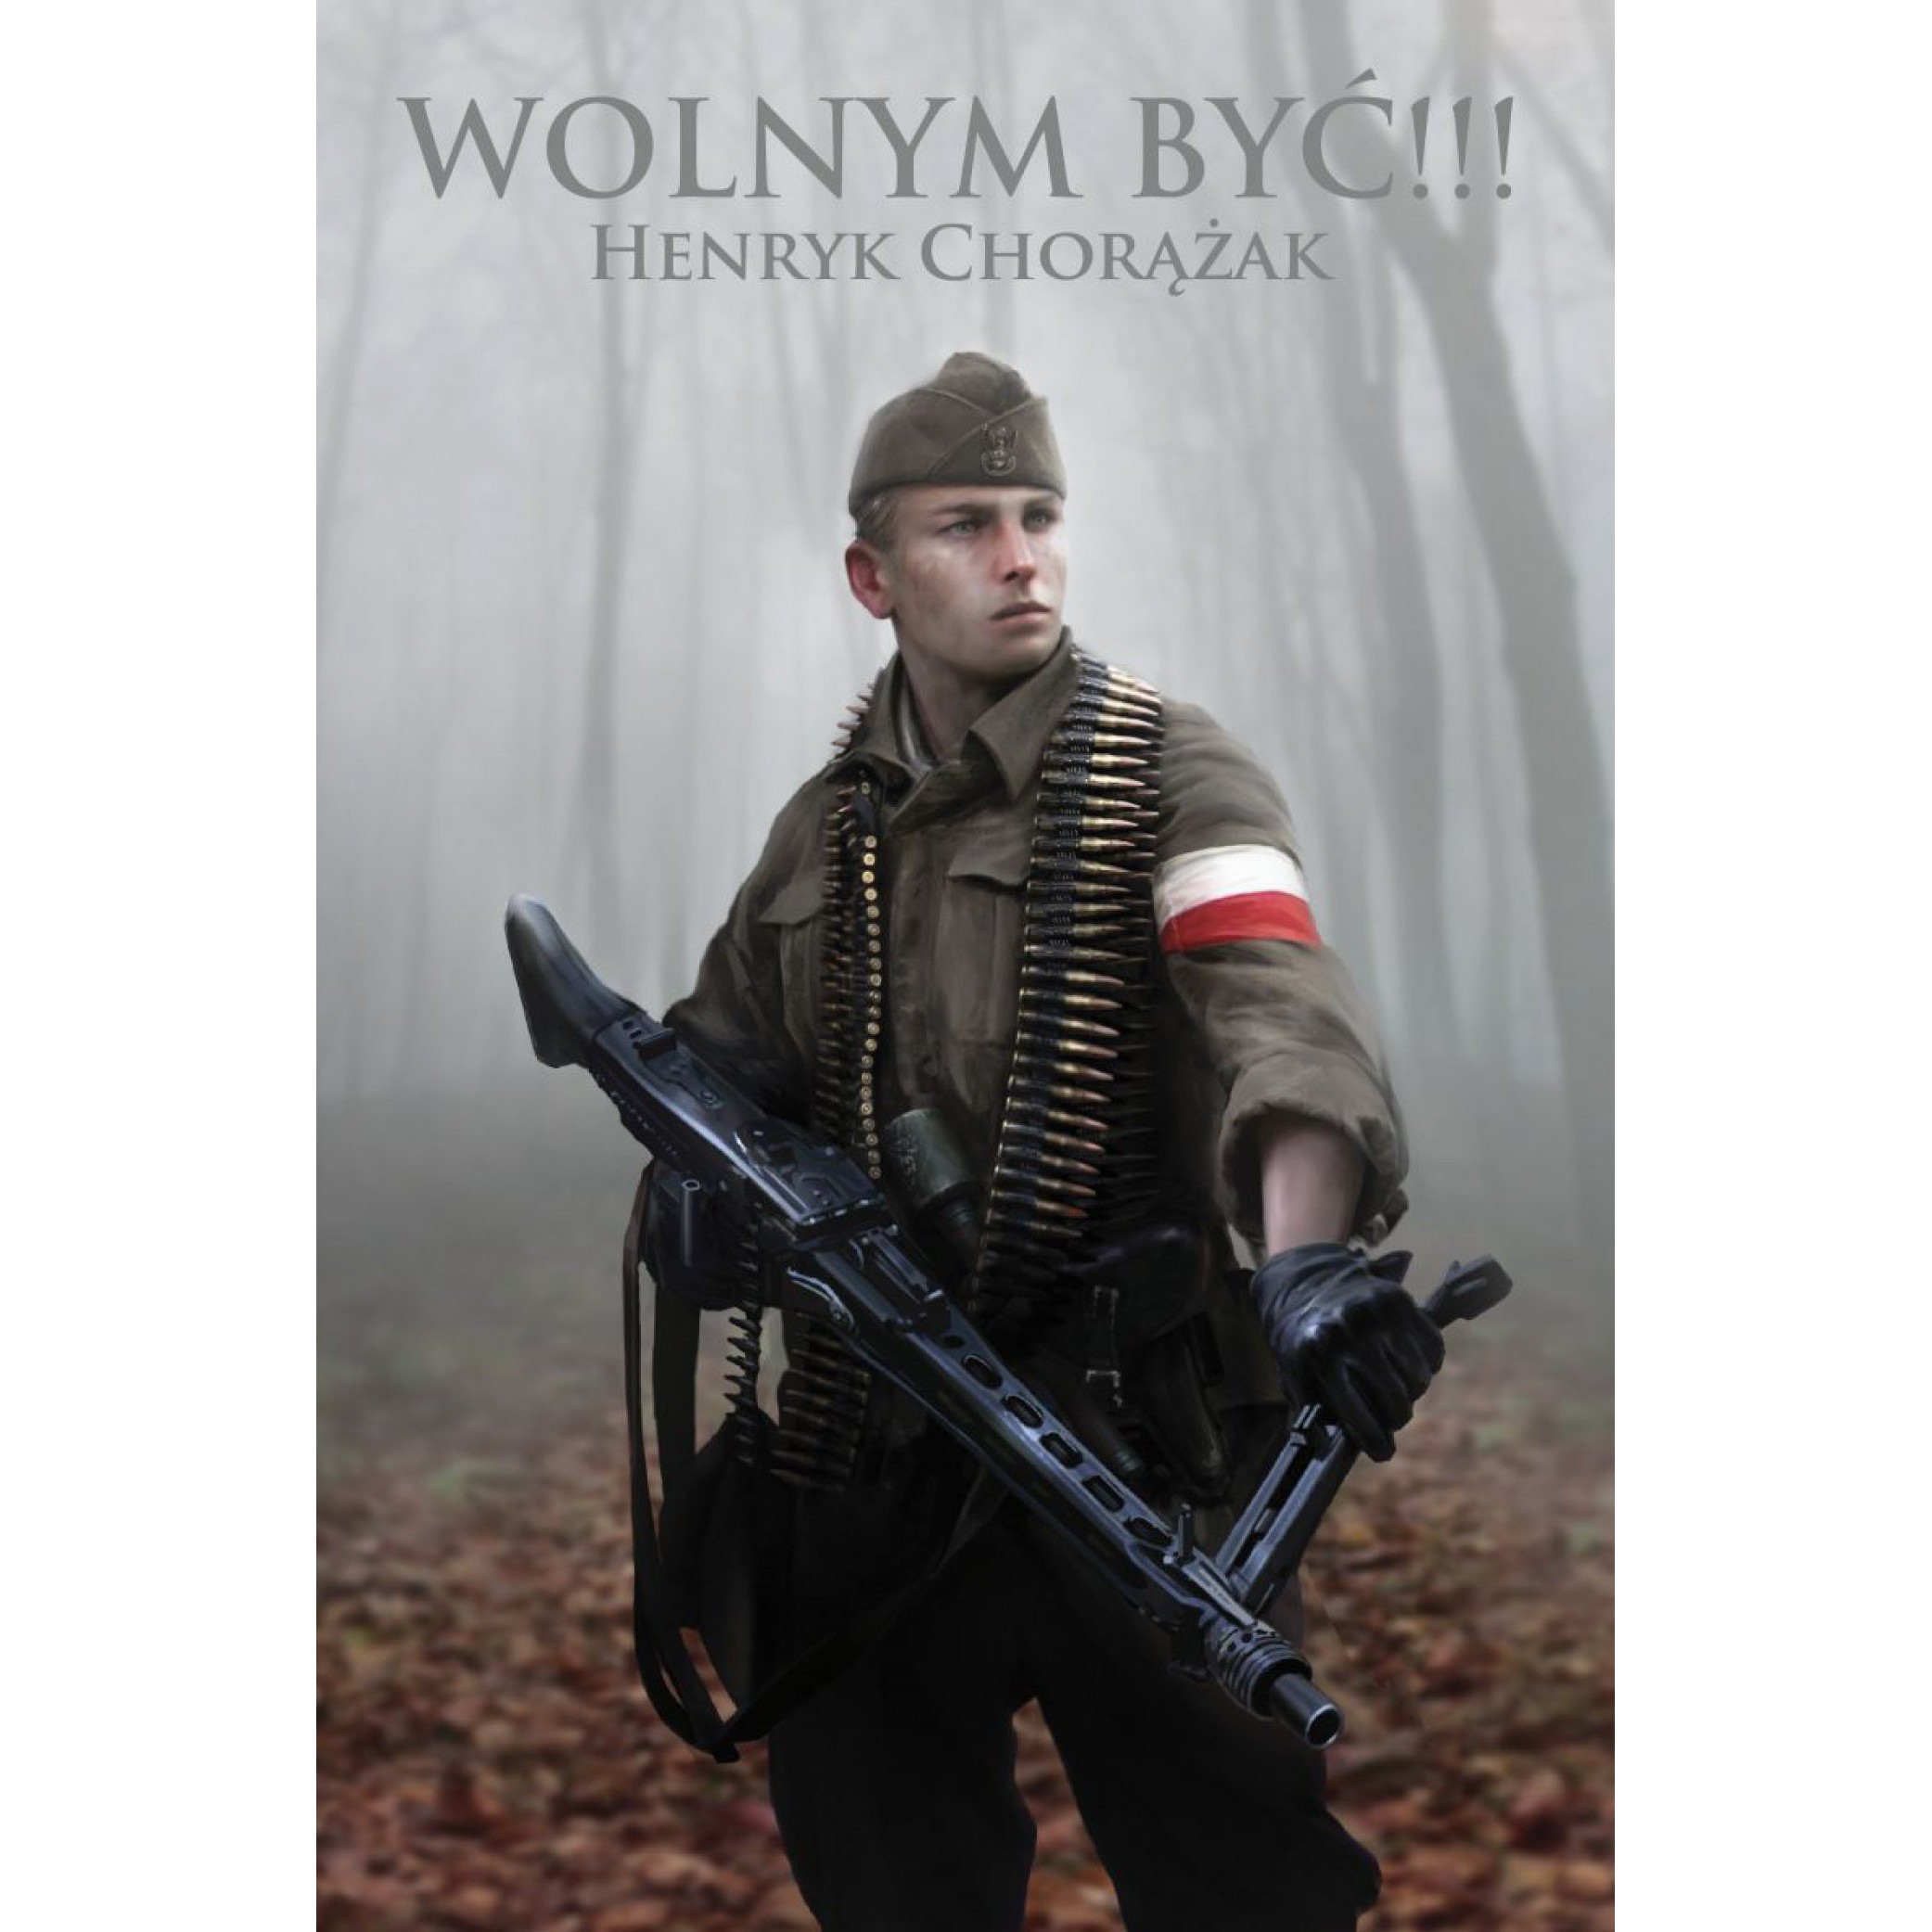 Wolnym być!!! - Outlet